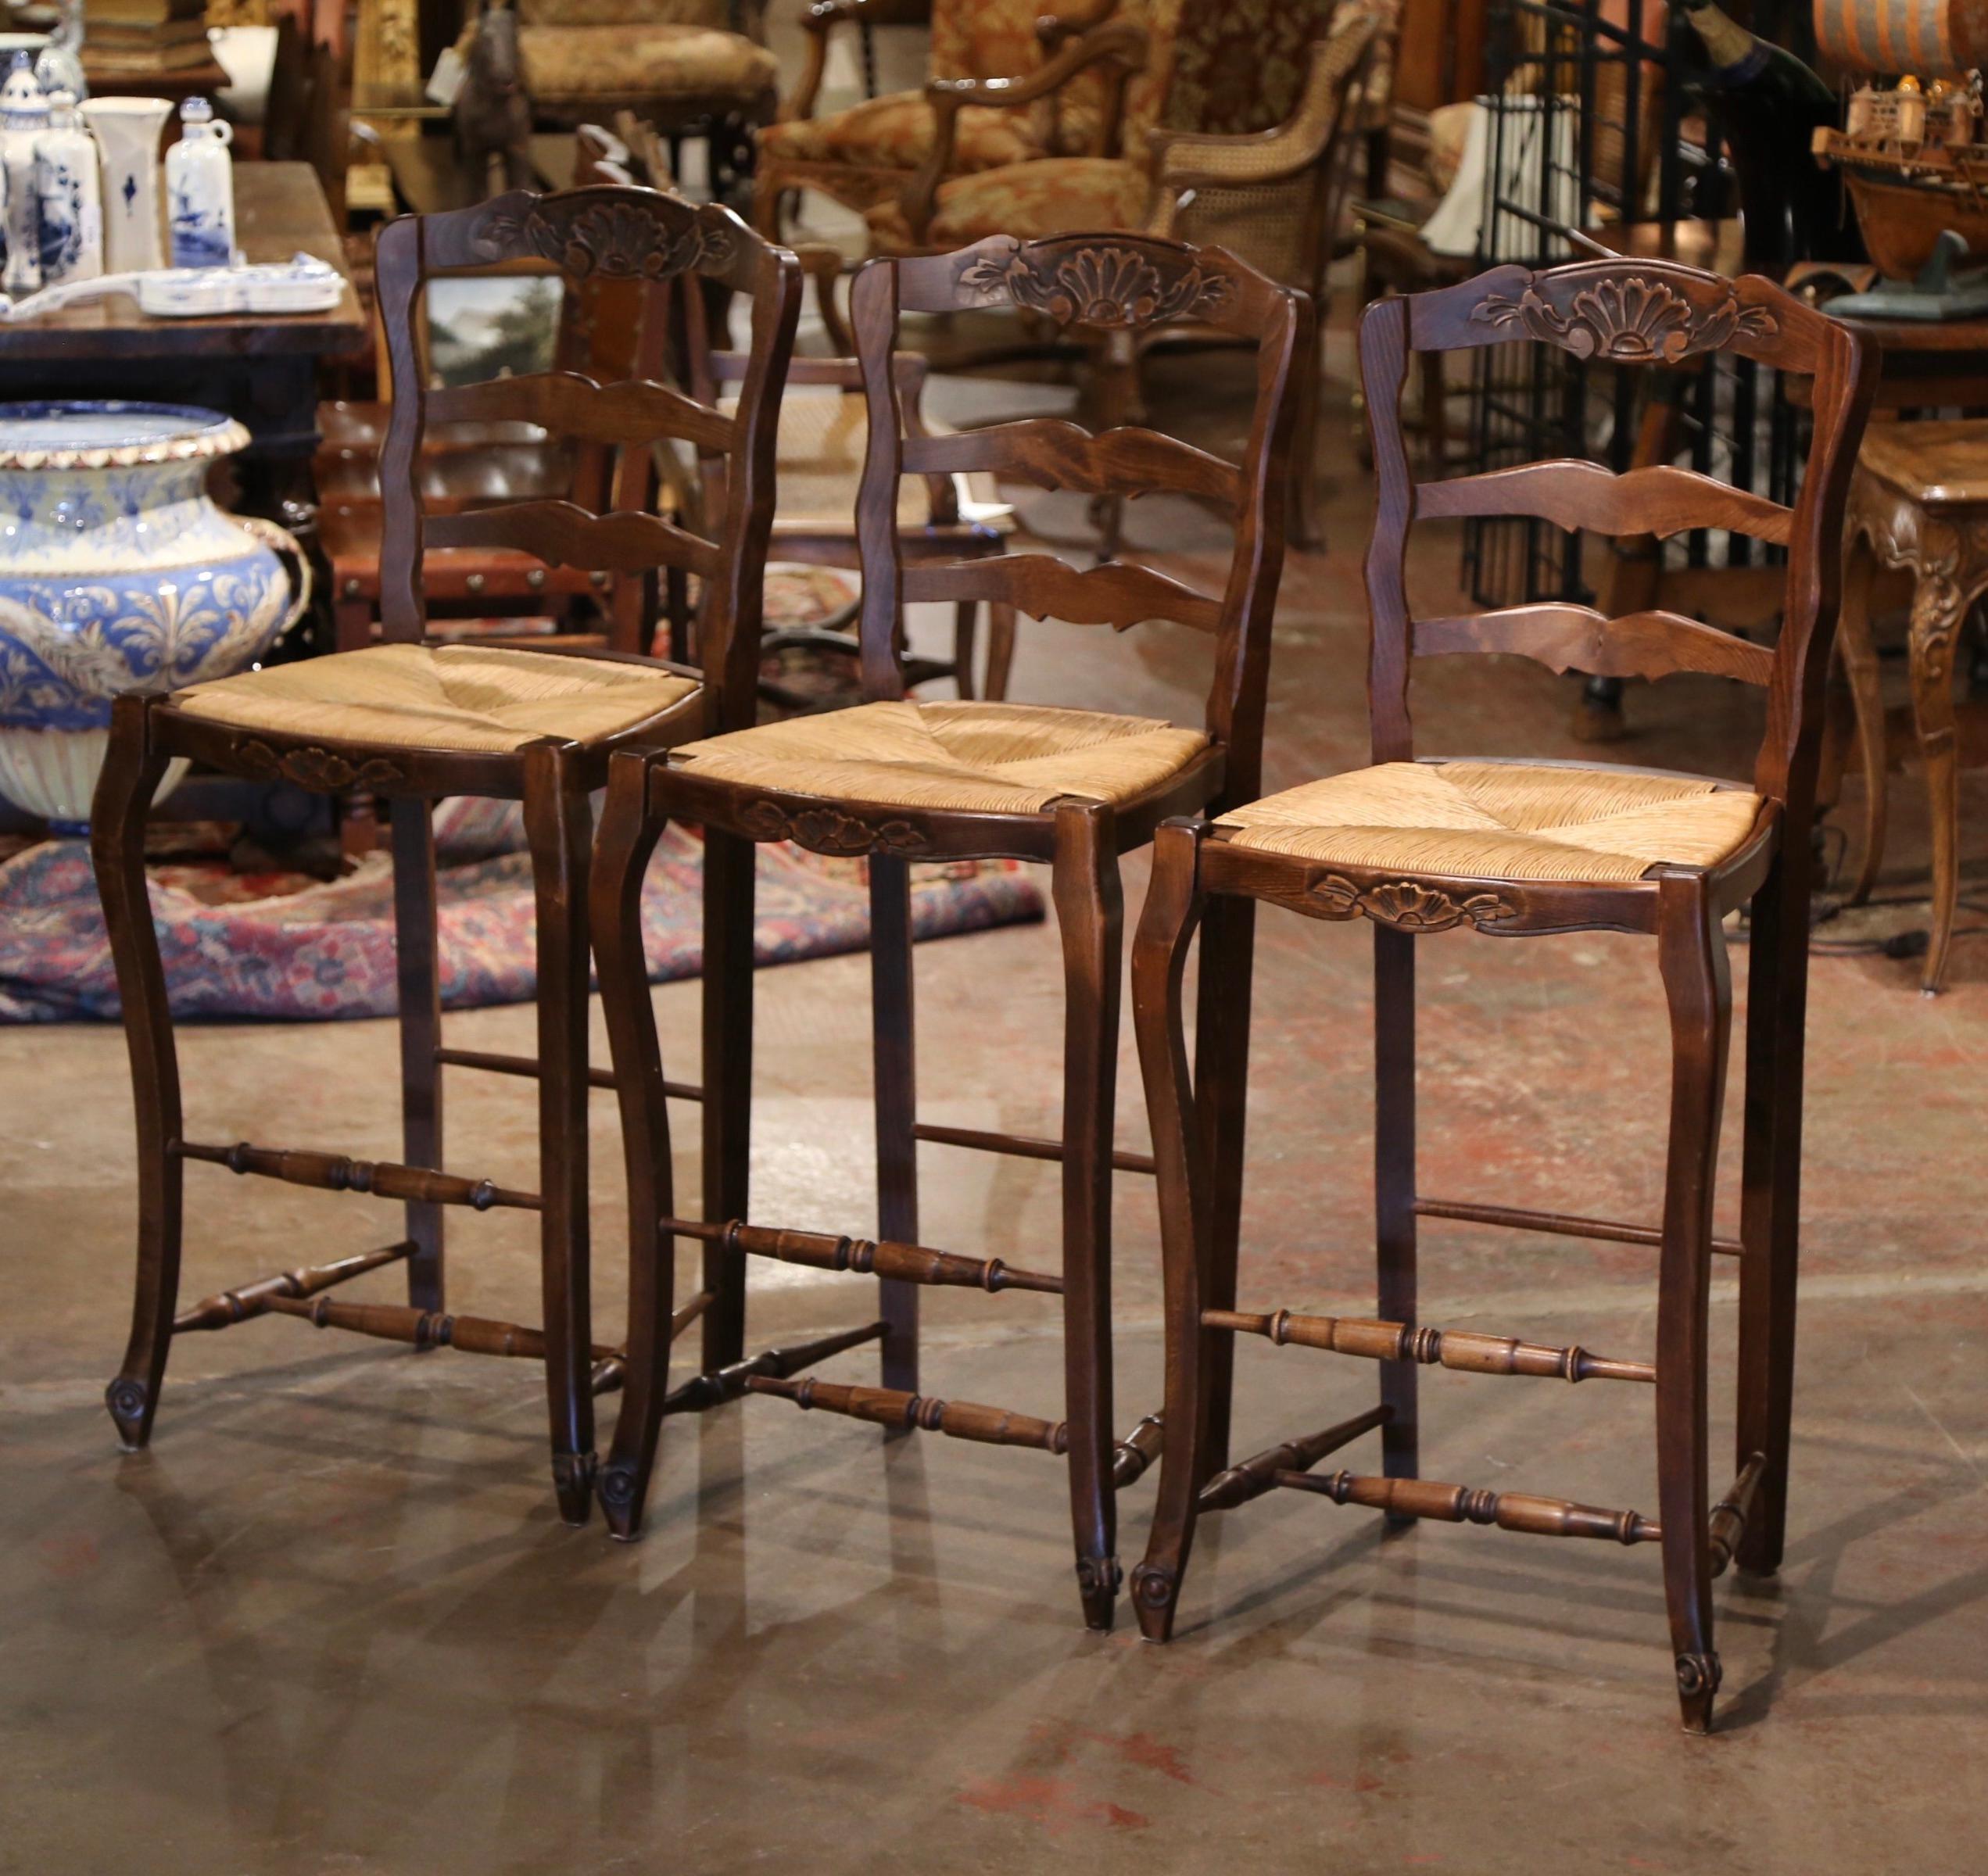 20th Century Set of Three Country French Ladder Back Bar Stools with Rush Seat from Normandy